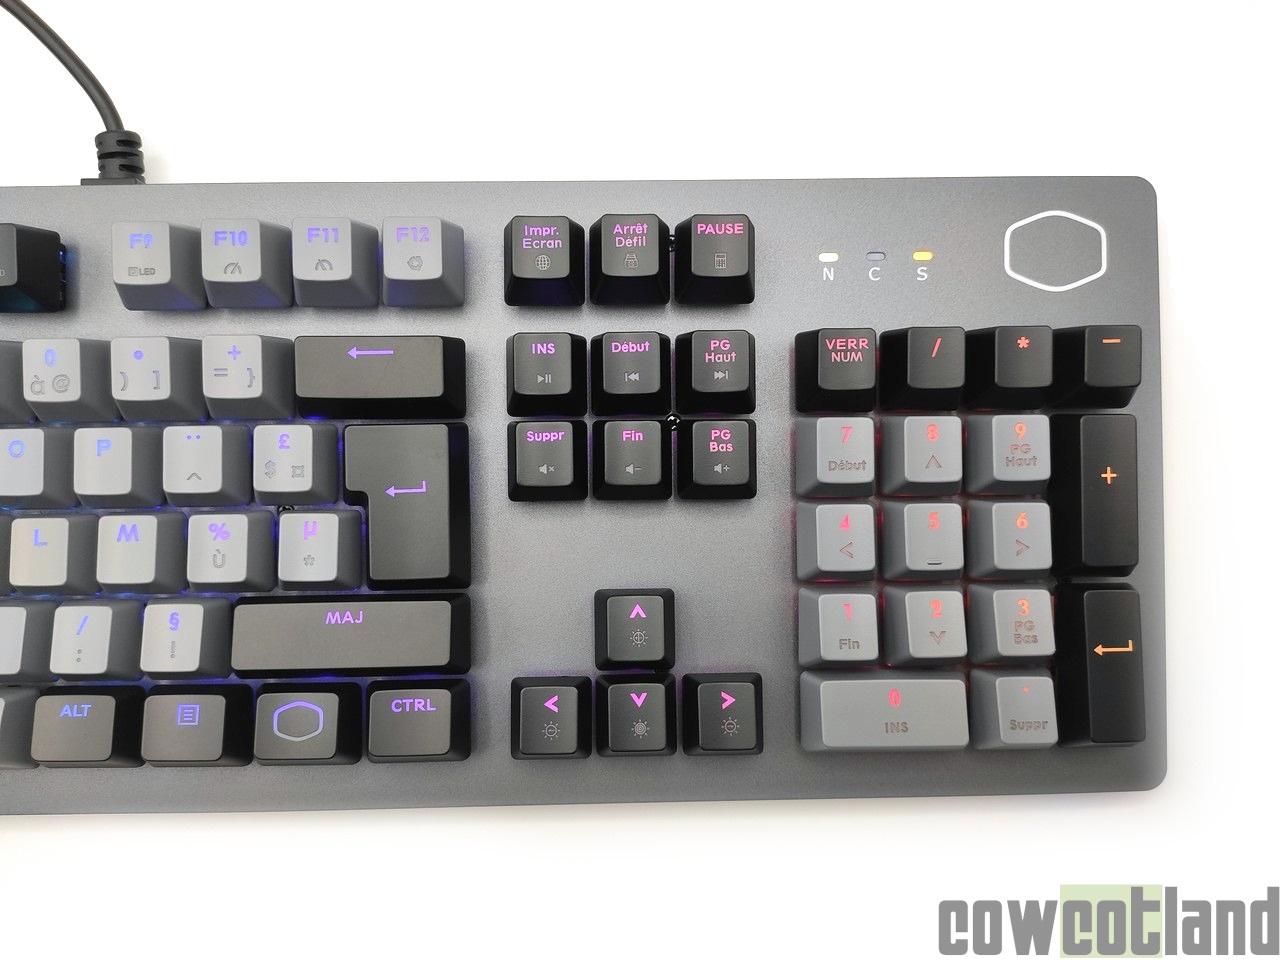 Image 46787, galerie Test clavier Cooler Master CK352 : un clavier plug-and-play  switchs optiques